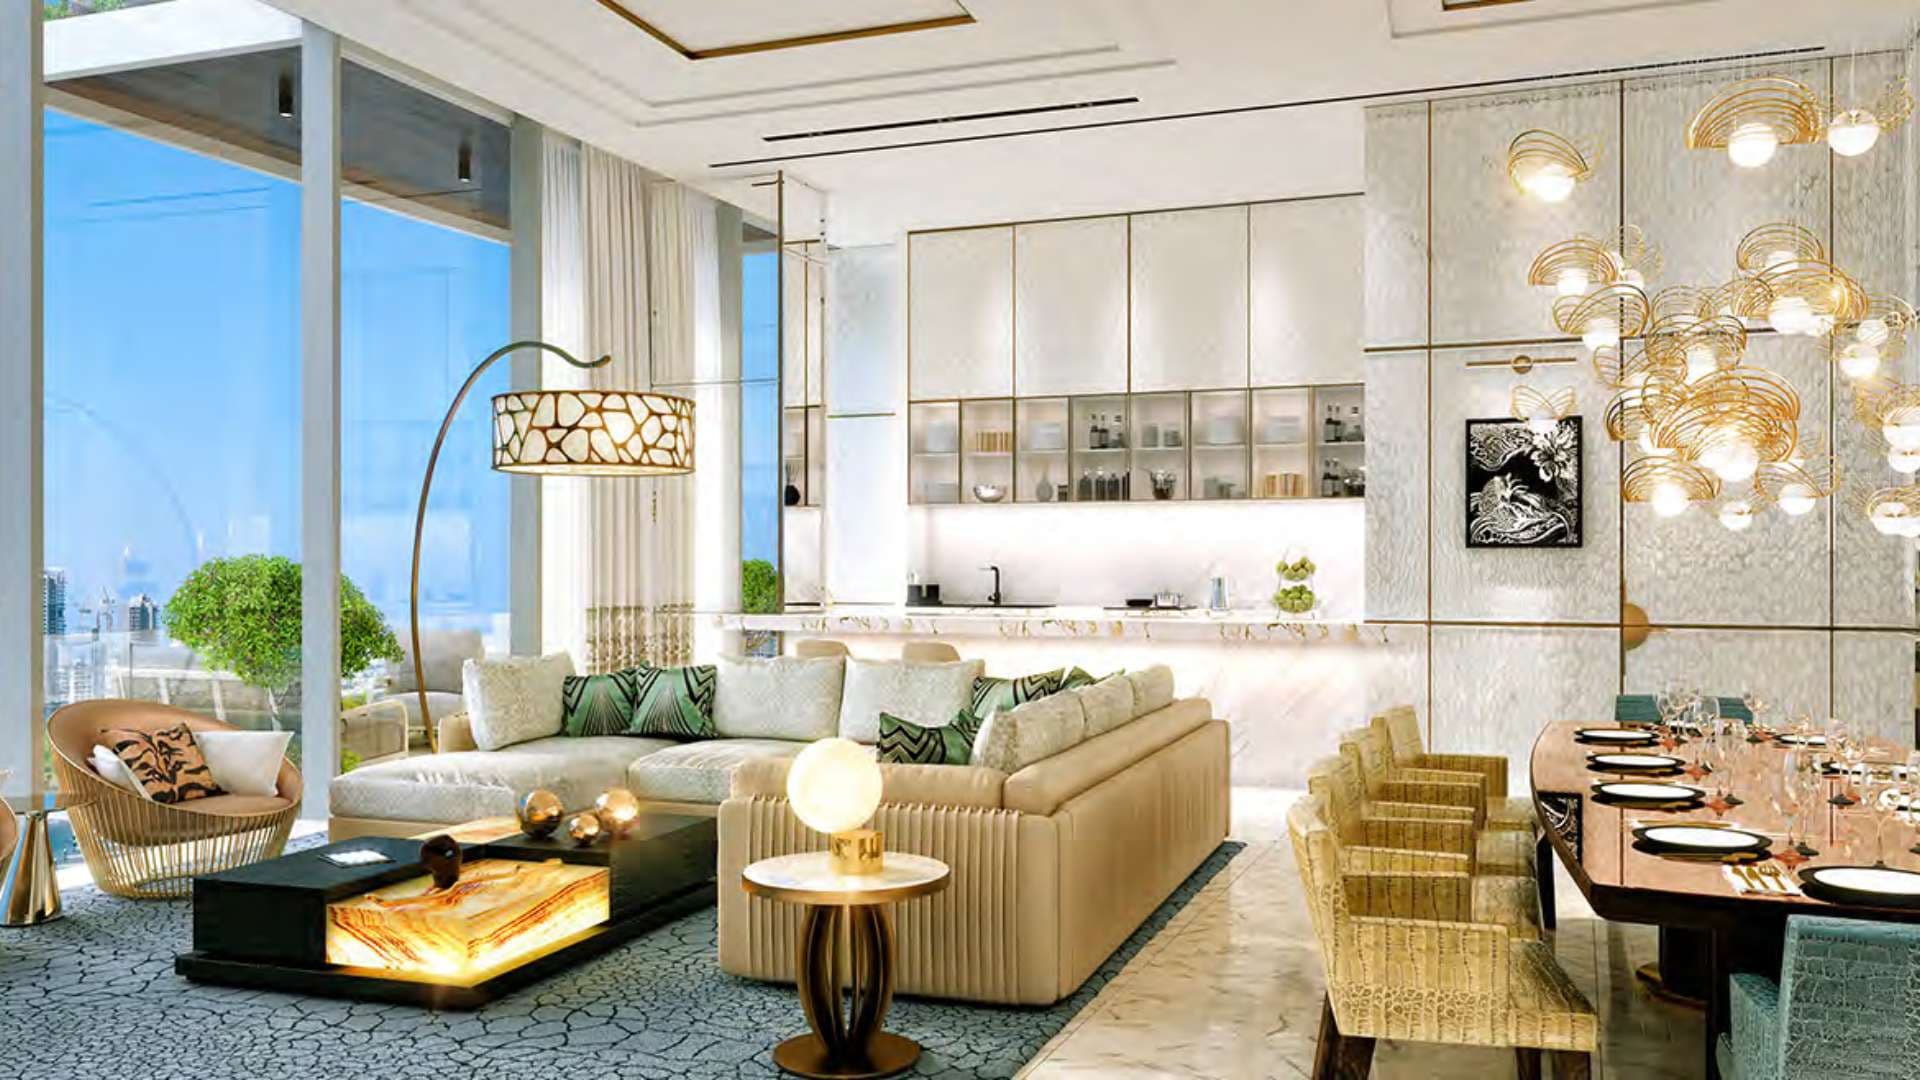  Bedroom Apartment For Sale Cavalli Tower Lp08640 2dd9d94bba0fbe00.jpg